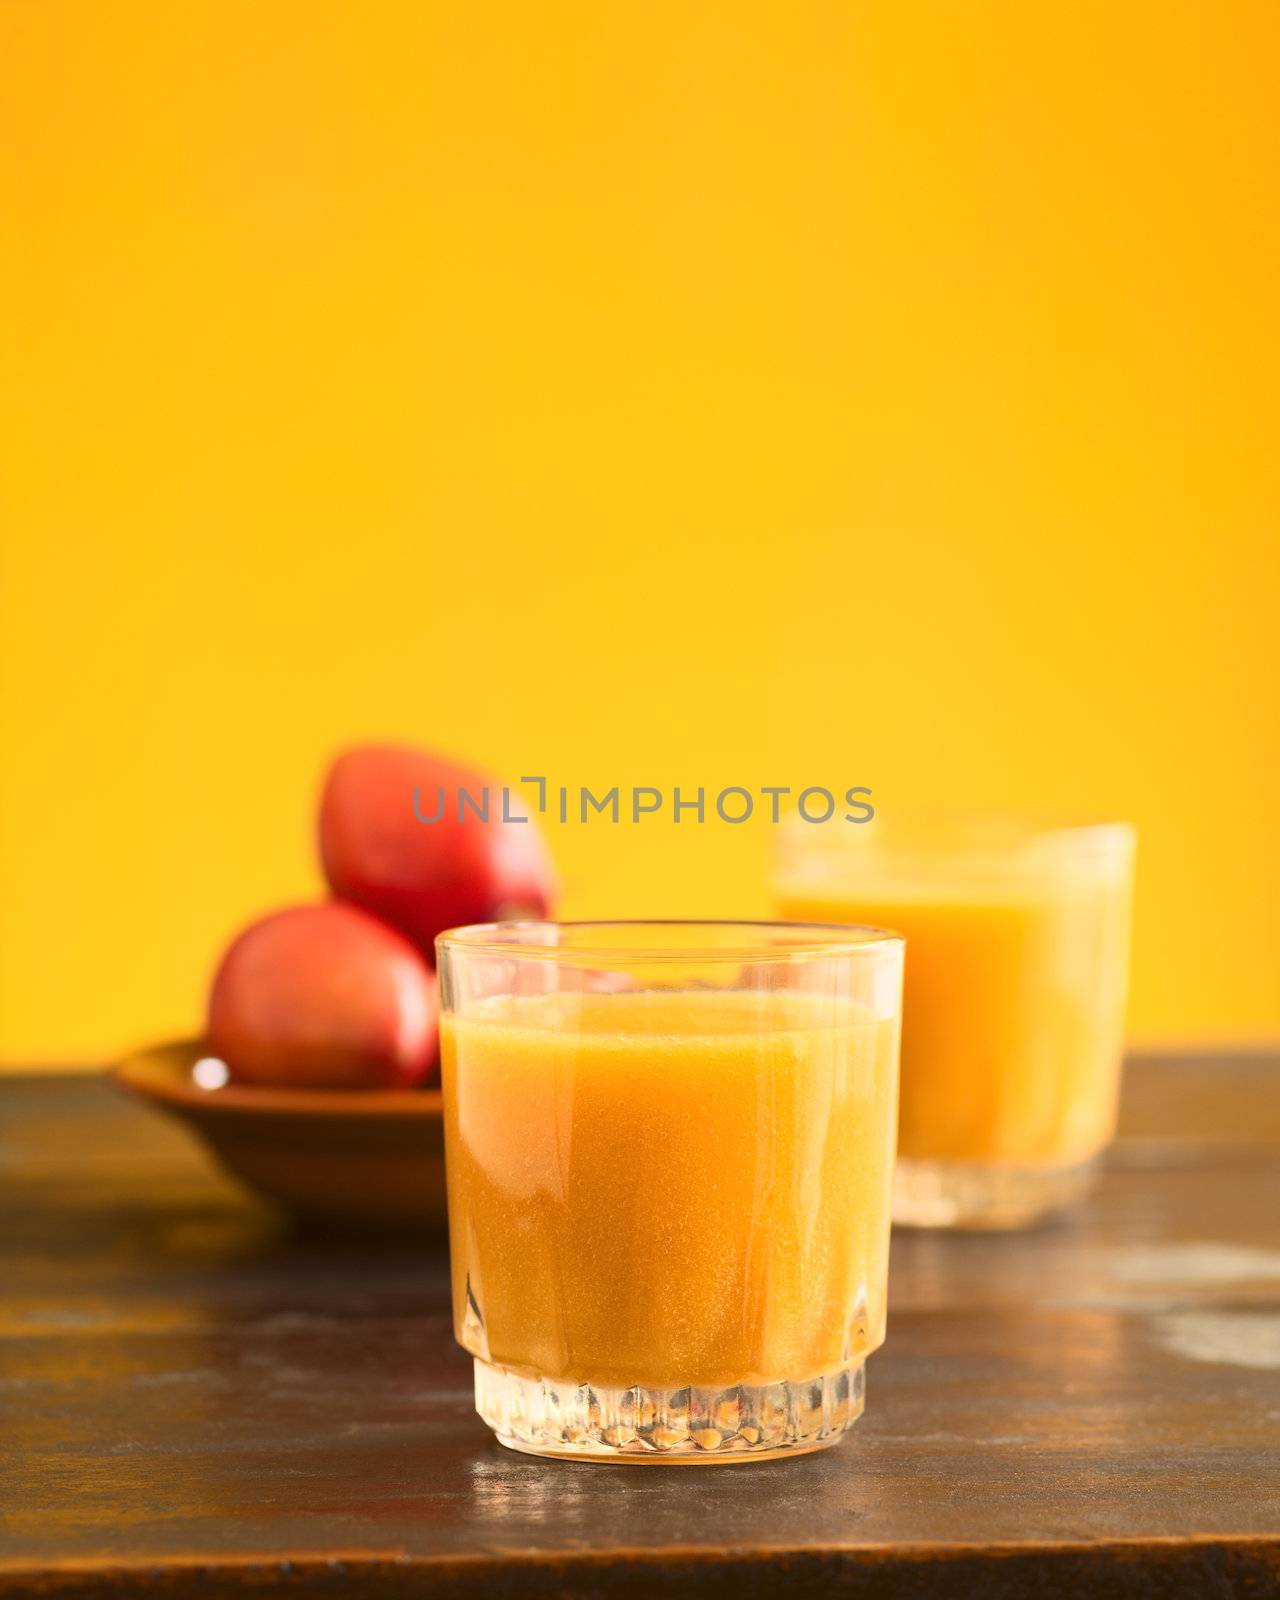 Freshly prepared tamarillo juice in glass with tamarillo (lat. Solanum betaceum) fruits in the back (Selective Focus, Focus on the front of the glass)